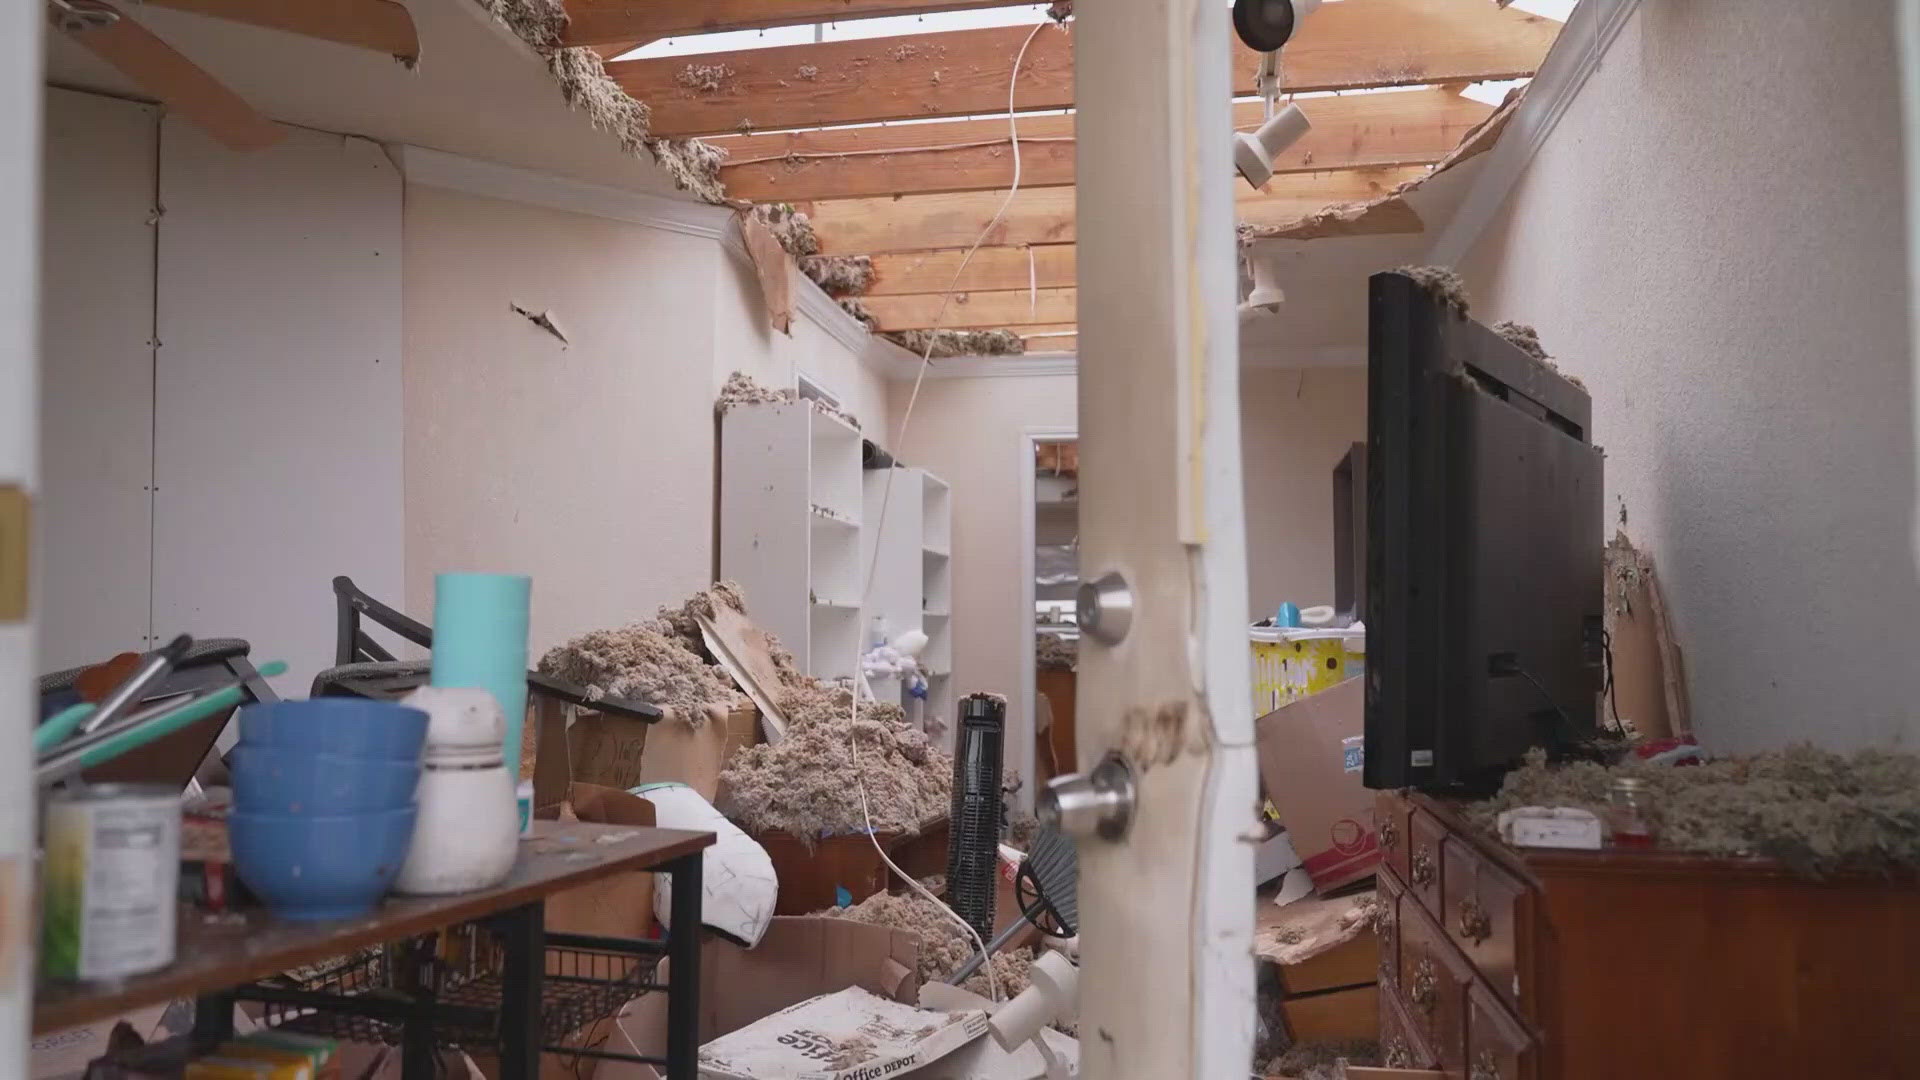 "Temple, TX 2024 Tornado Recovery Needs" was created by a Central Texan who saw the need for a safe, easy space to care for those in need after the storm.